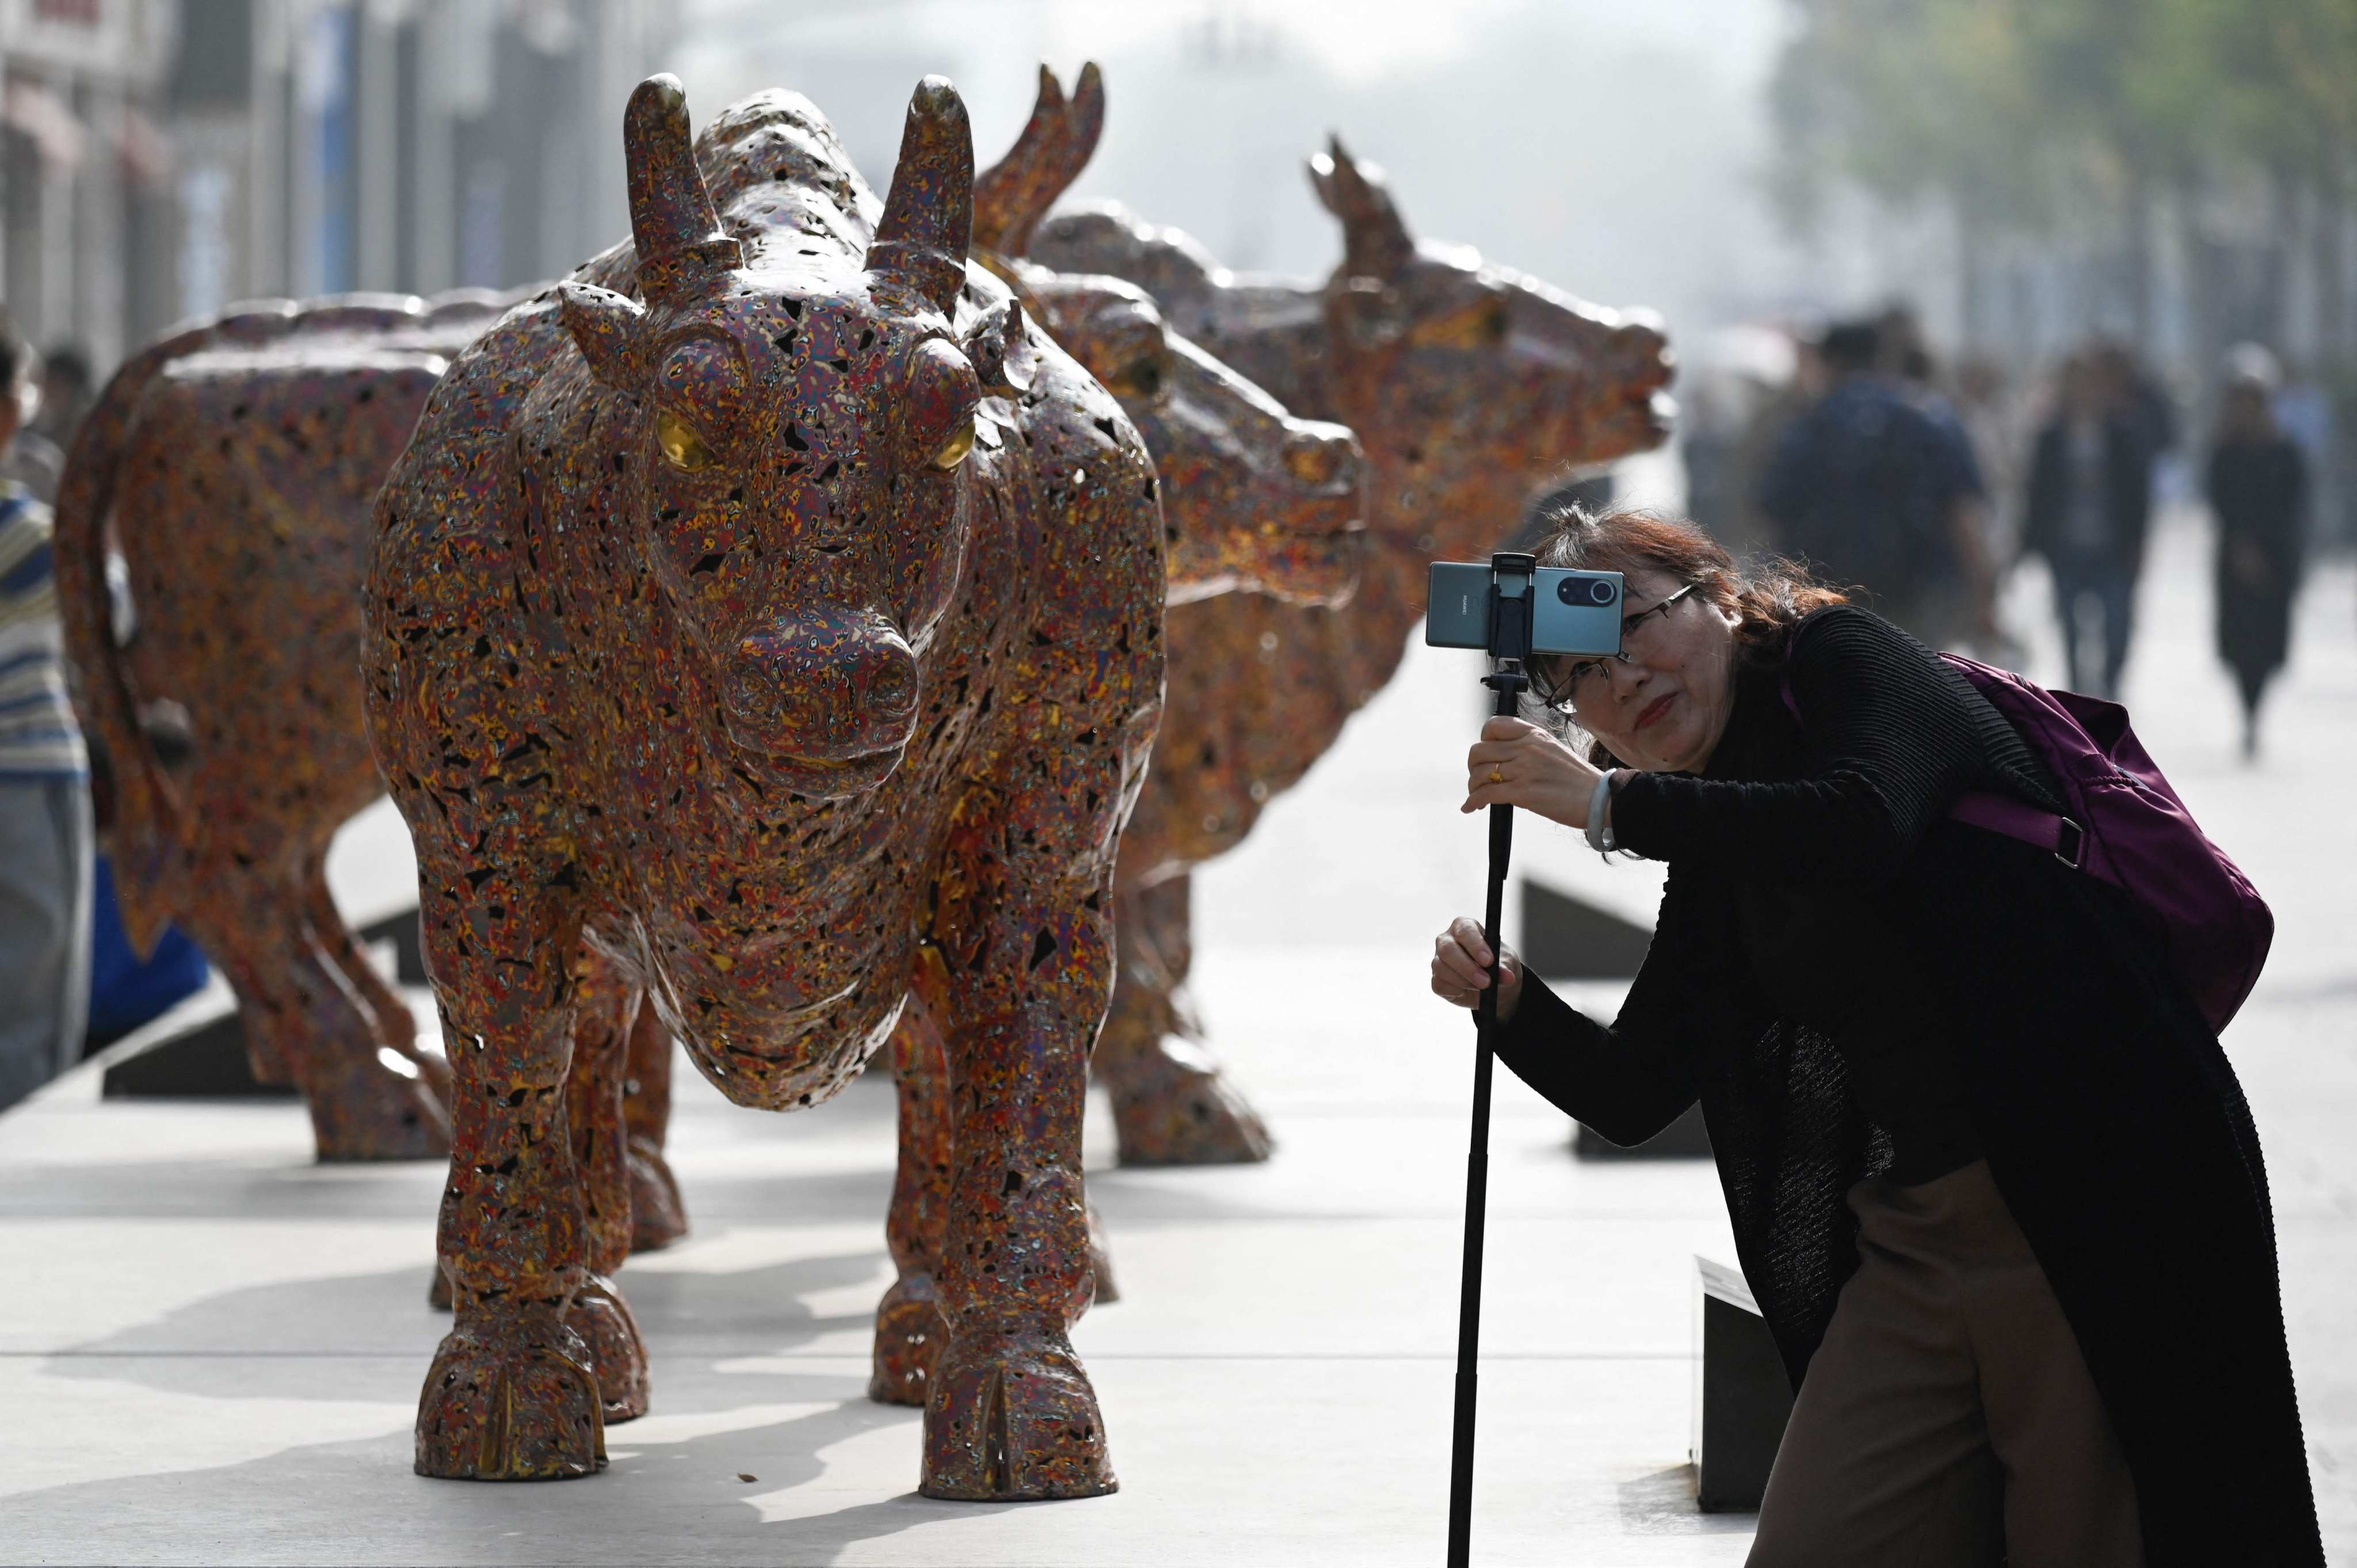 A woman takes a selfie in Beijing on October 31. Despite some bullish economic indicators in recent months, global investors remain hesitant about China’s prospects and are pulling back on their exposure to the country. Photo: AFP